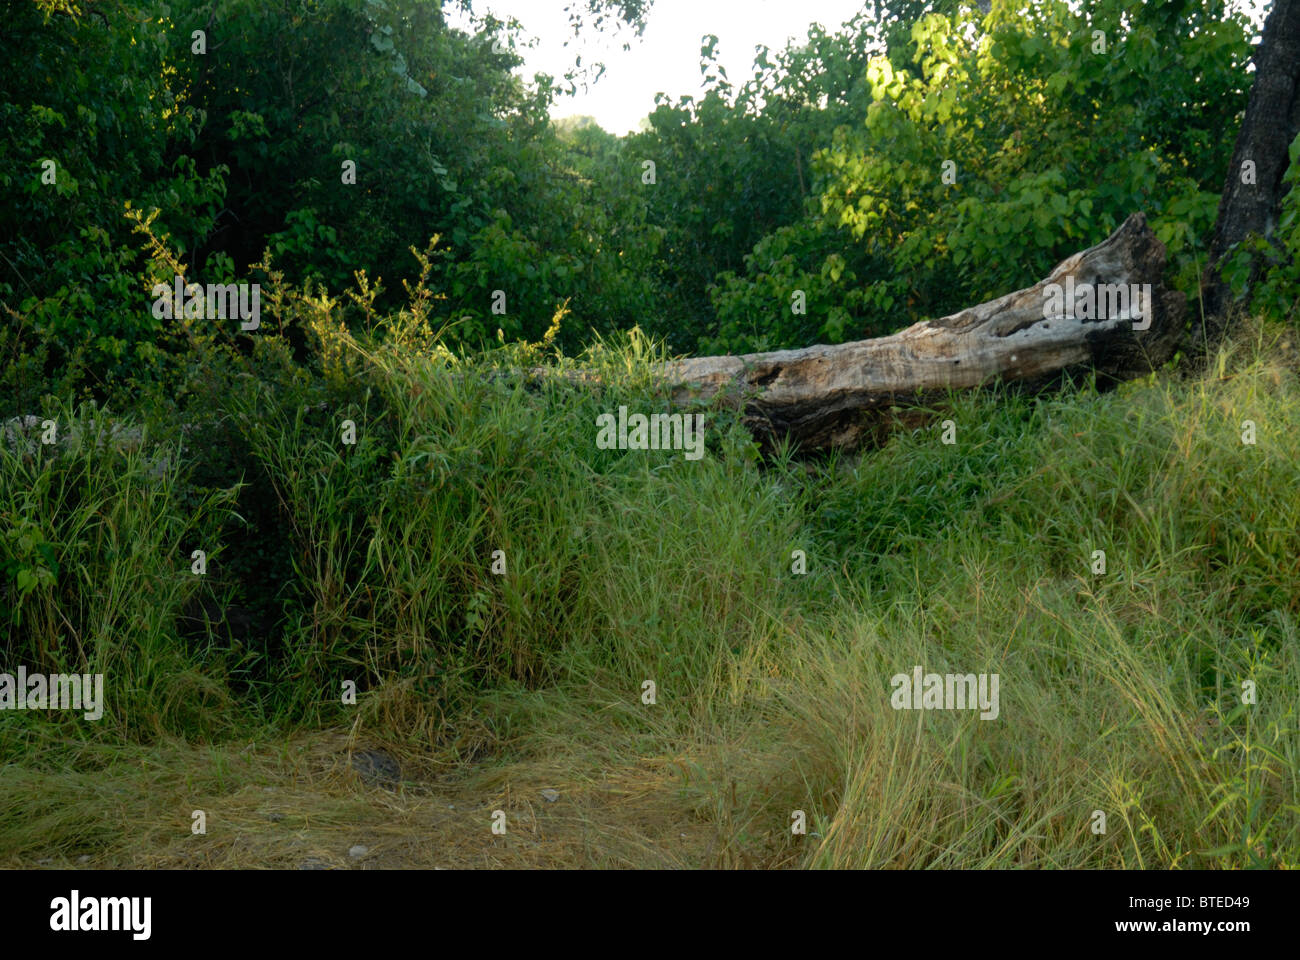 Leopard lair site amongst thick tall grass and under a fallen log Stock Photo